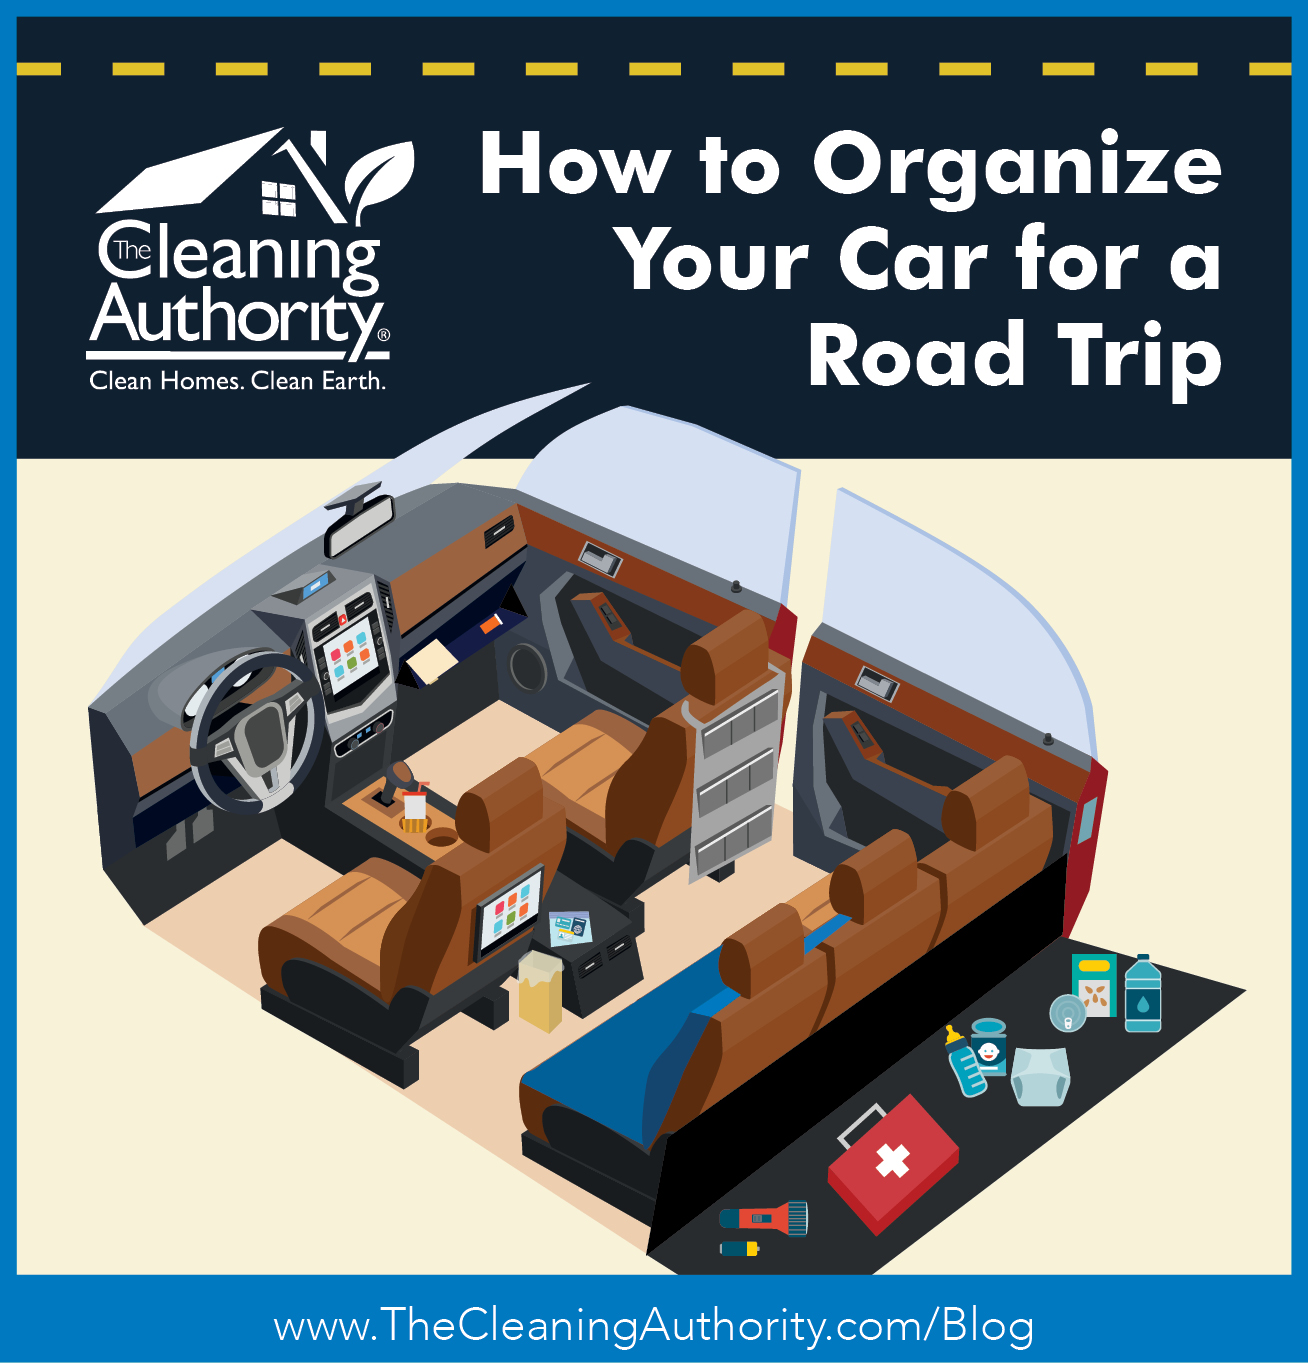 https://www.thecleaningauthority.com/images/articles/TCA_HowToOrganizeYourCar_Blog_MainHeader.2107091206296.jpg